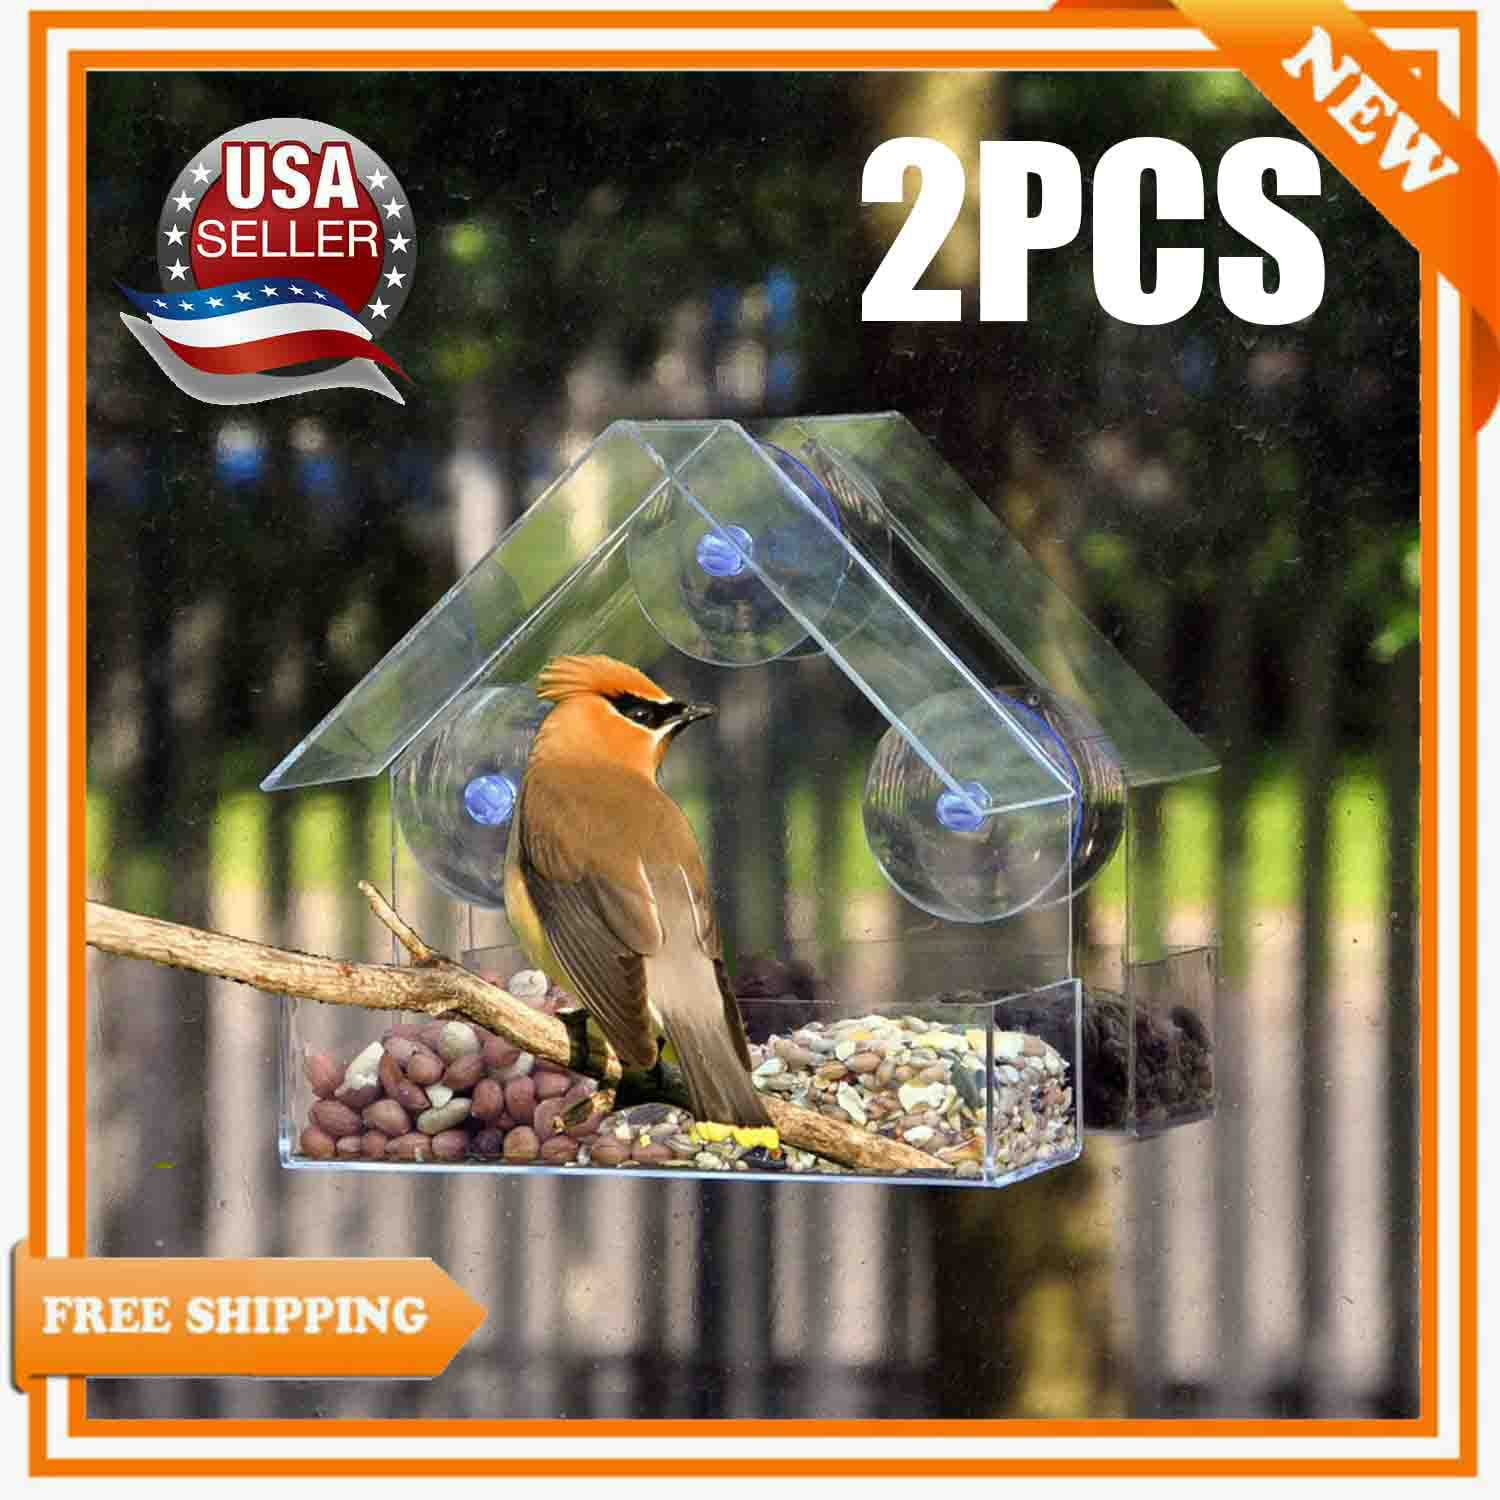 Window Bird Feeder Wild Table Hanging Suction Perspex Clear Viewing Seed Nut 